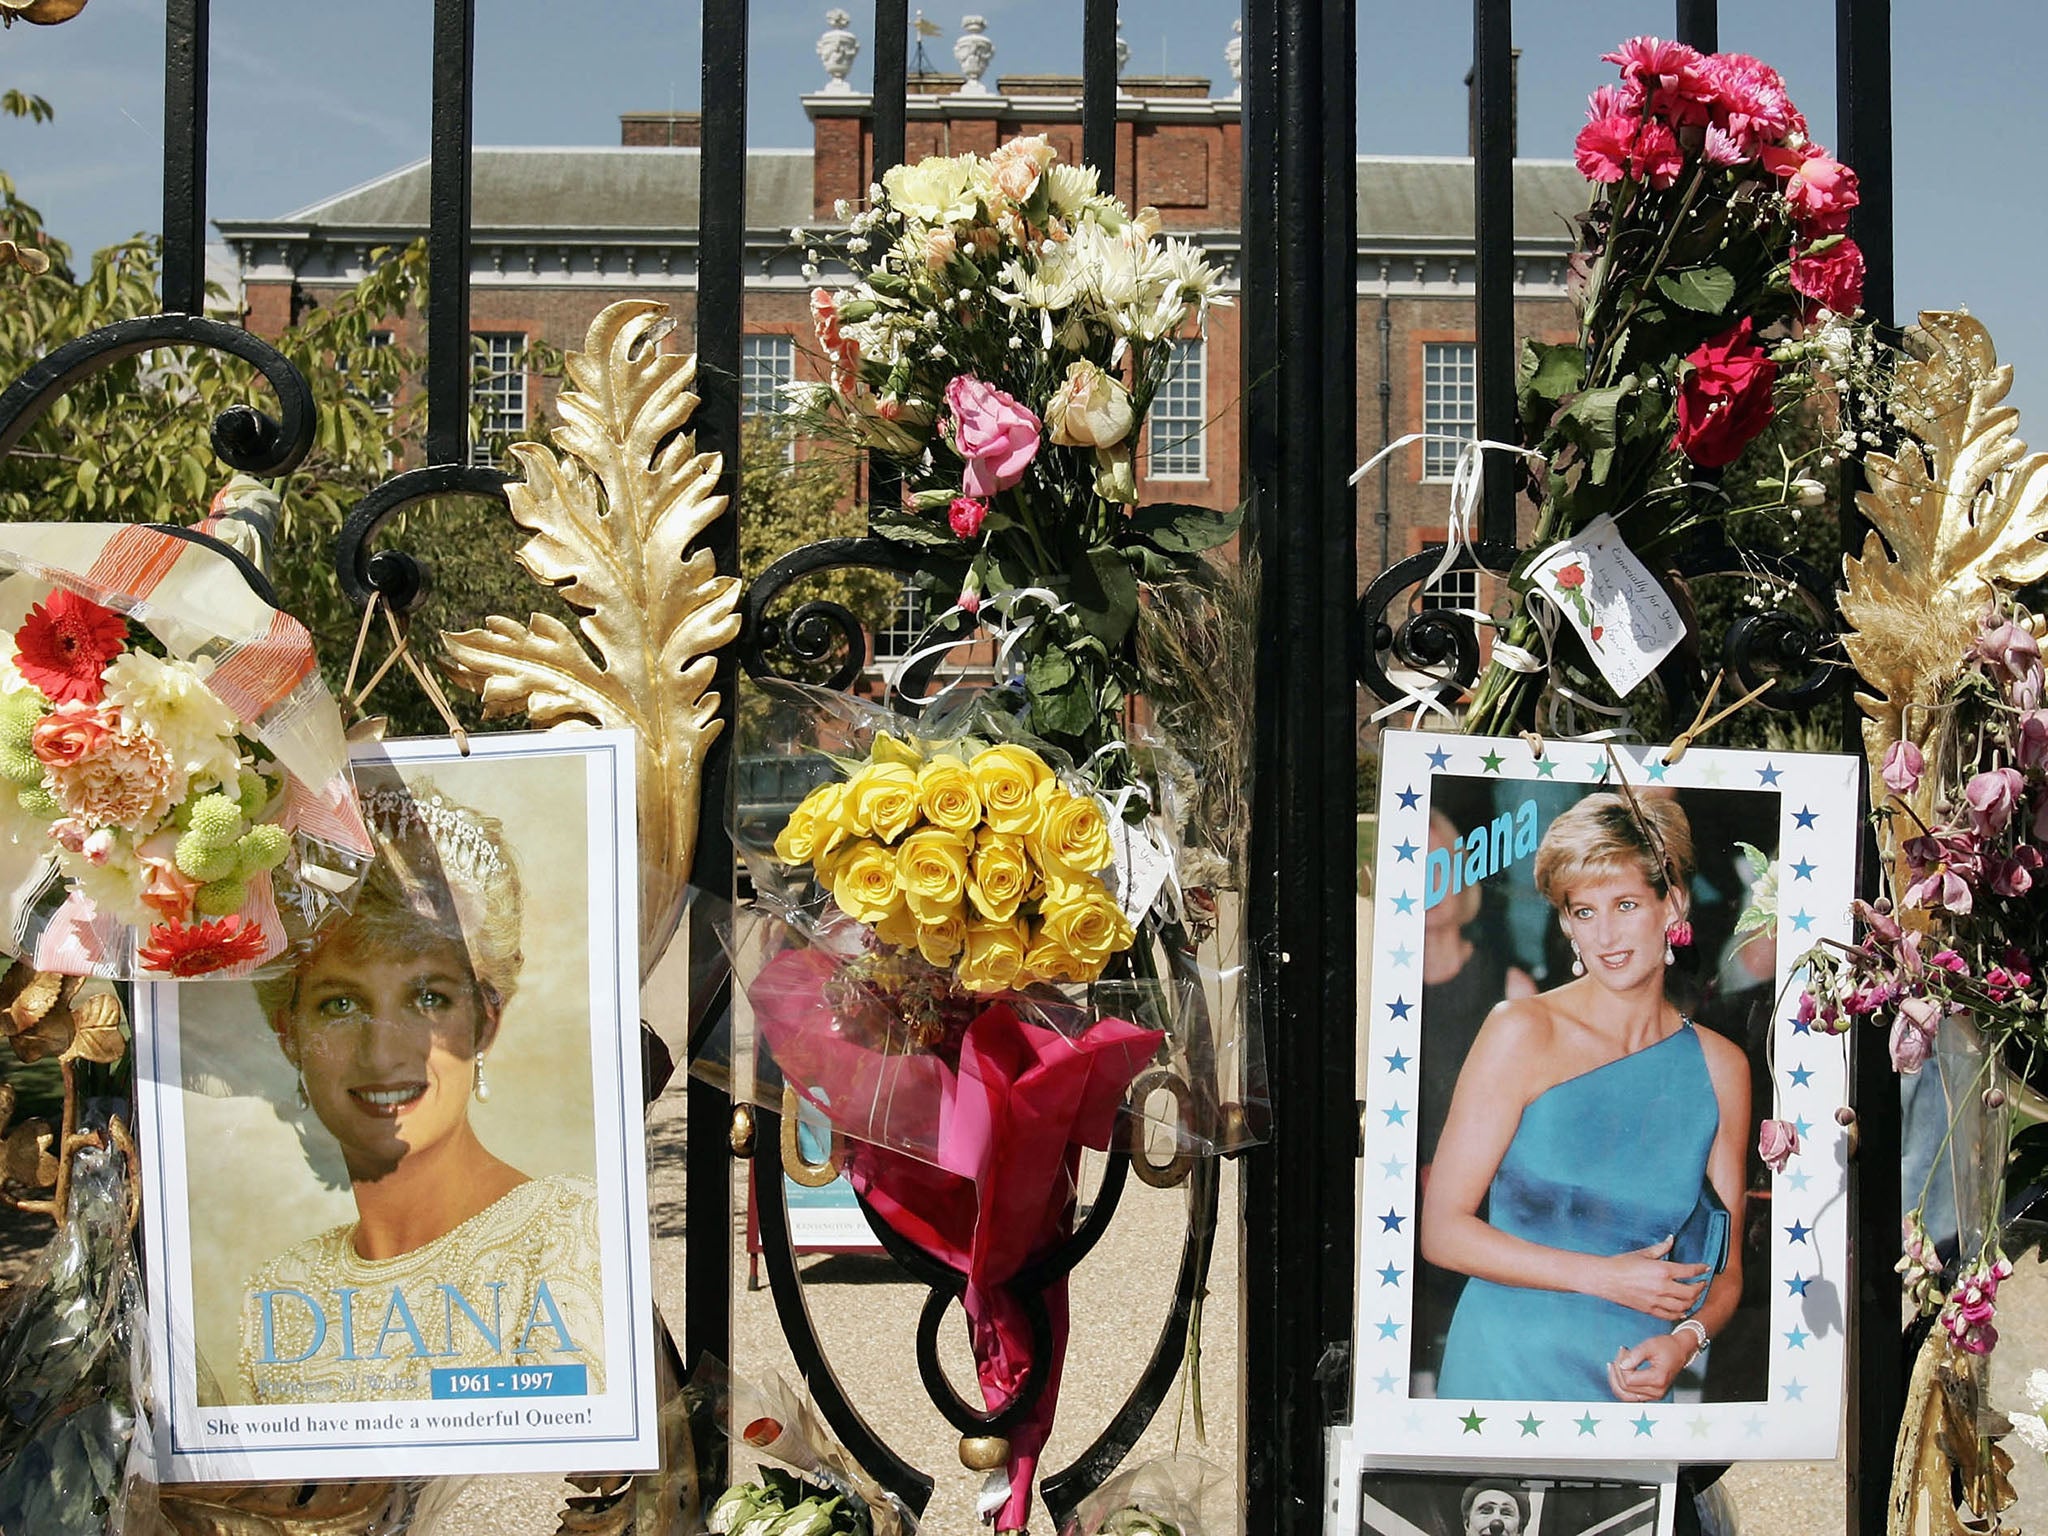 Flowers, photographs and tributes are placed in memory of Princess Diana, Princess of Wales on the gates of Kensington Palace